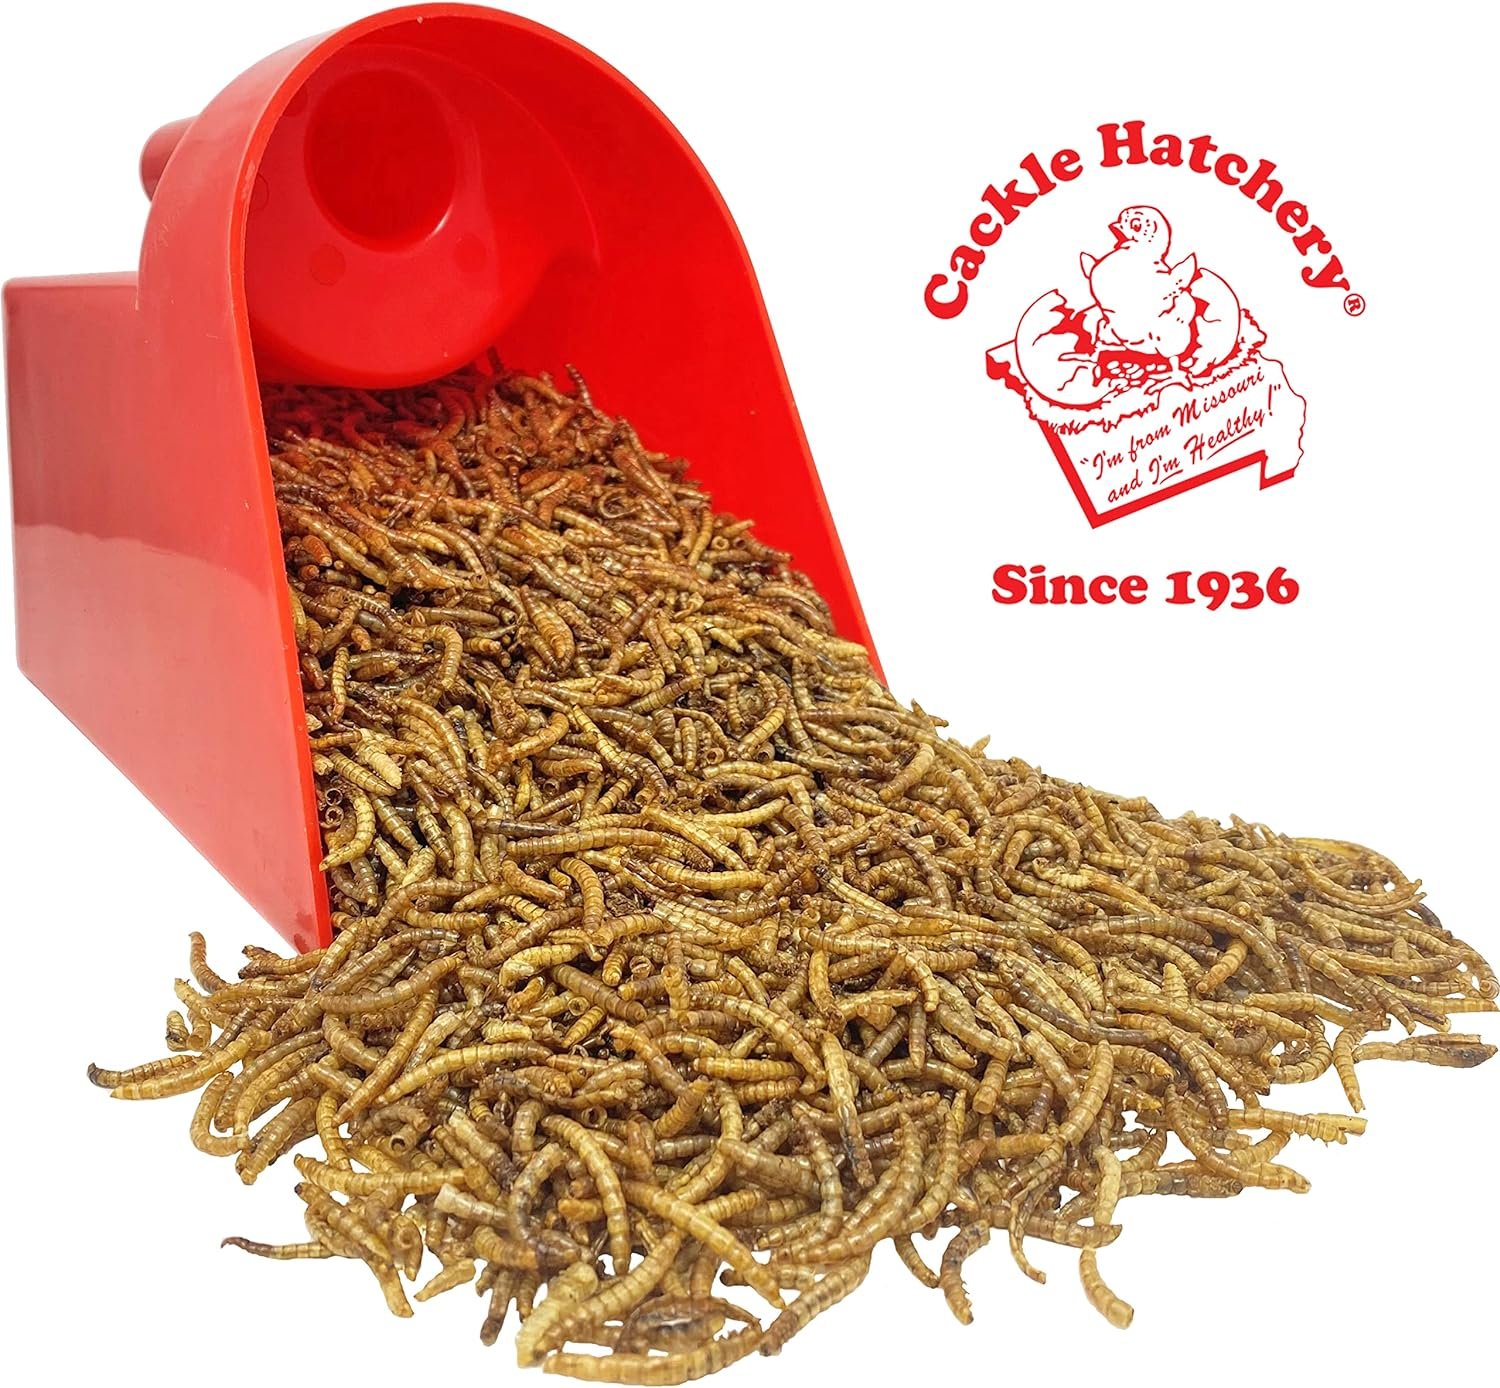 Cackle Hatchery Dried Mealworms for Chickens - 11 LB